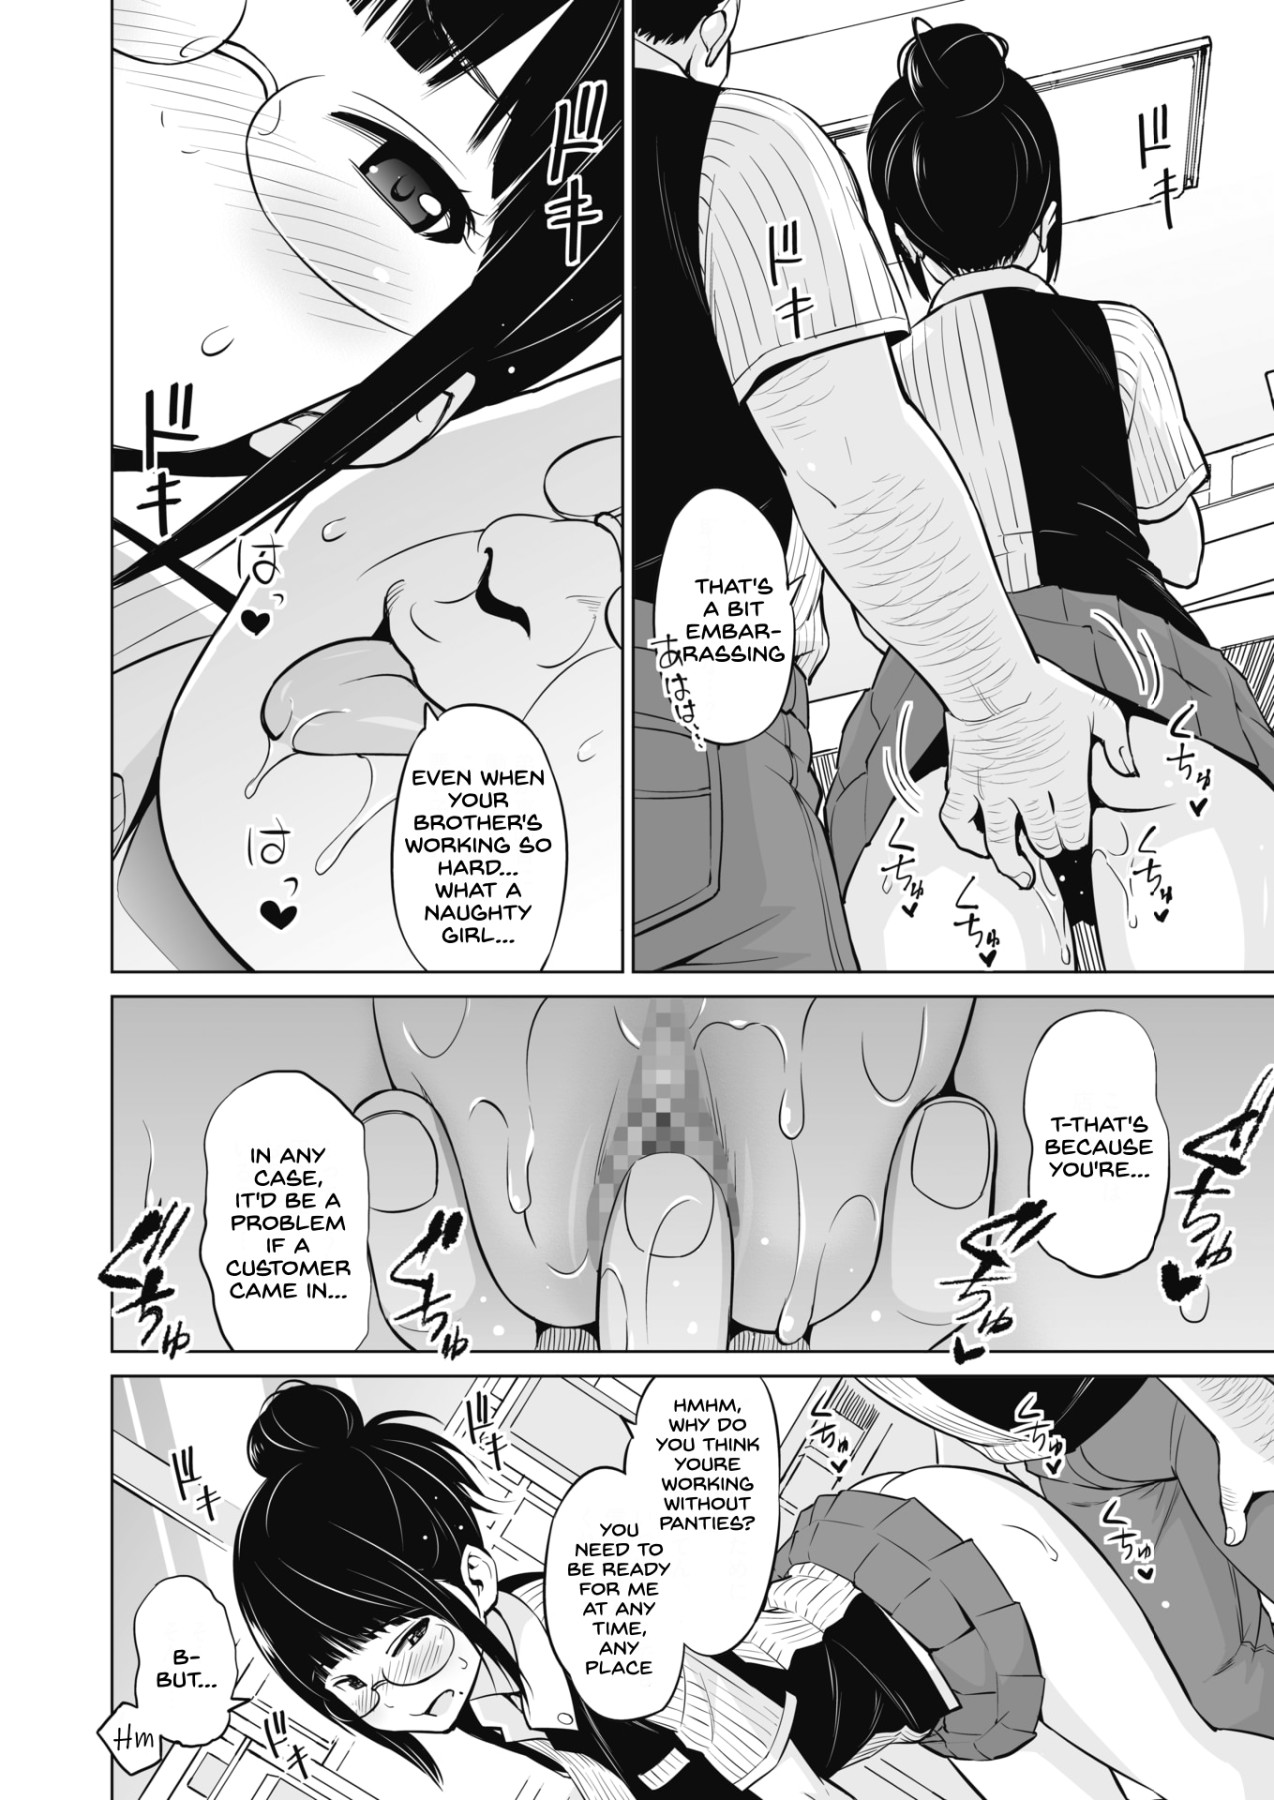 Hentai Manga Comic-Older Sister And Younger Brother Part-Time Job-Chapter 1-2